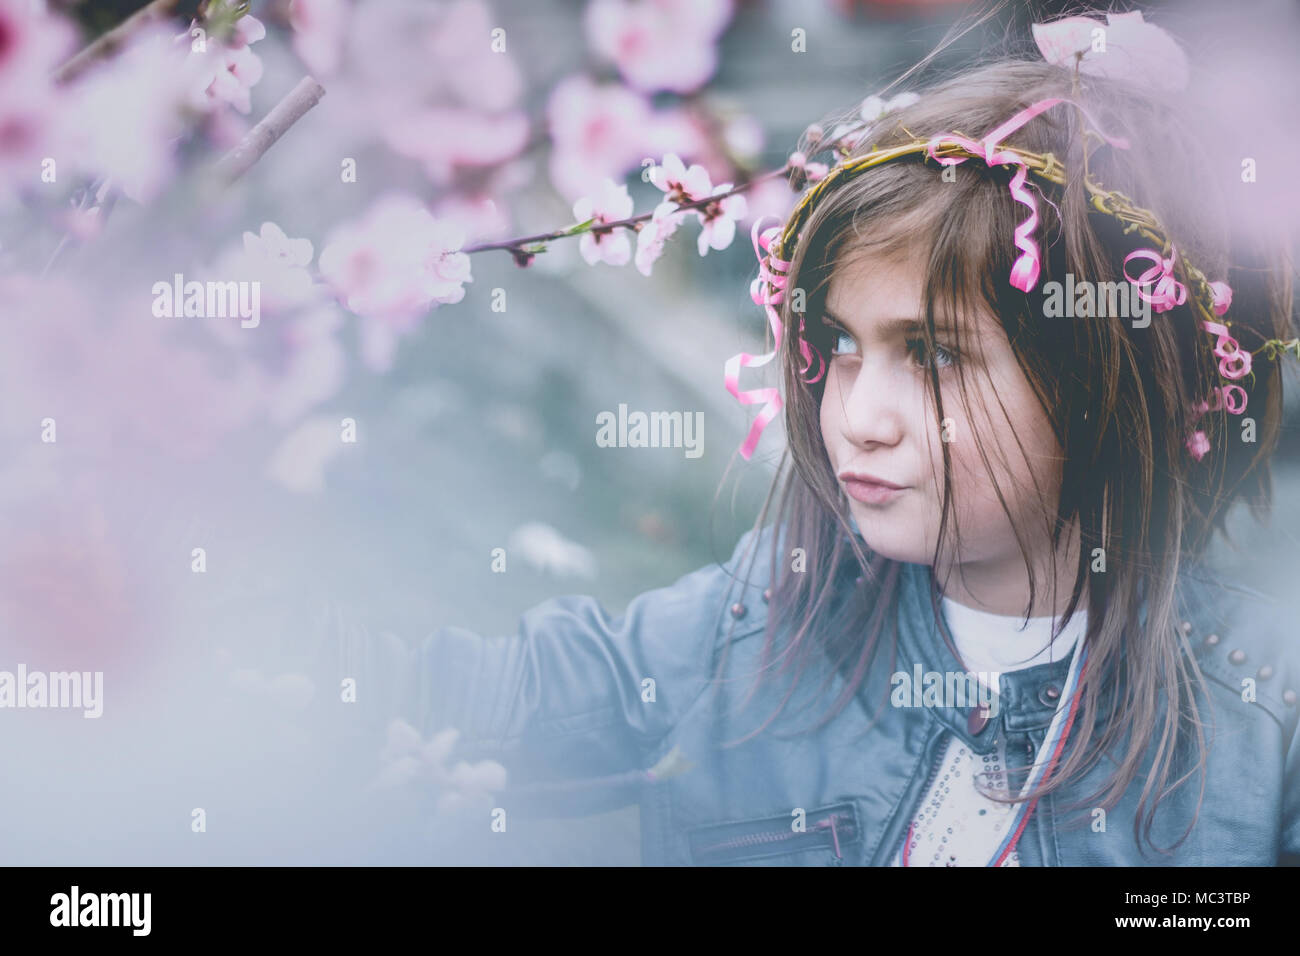 Beautiful little girl with flower wreath on her hair, traditionally wore for Lazarus saturday, among cherry flowers; spring background Stock Photo